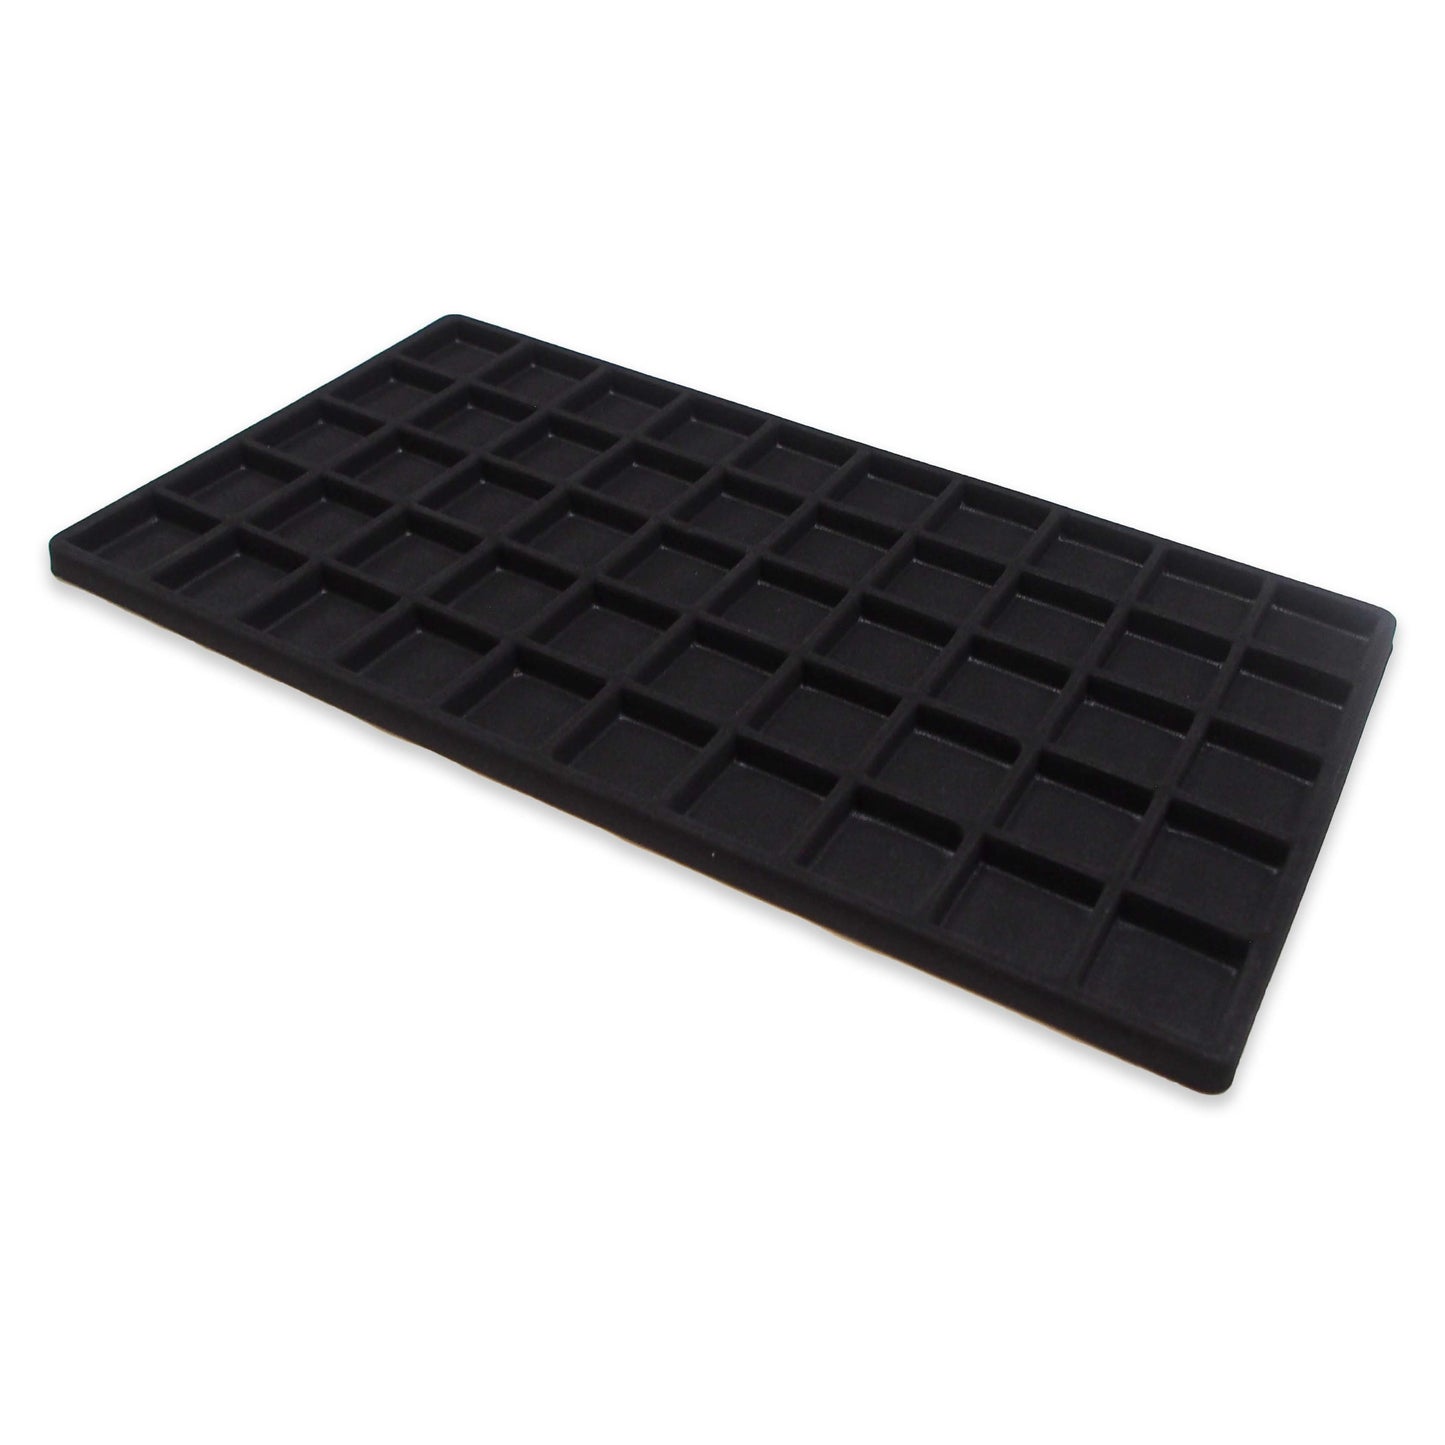 Black Flocked Compartment Tray Inserts